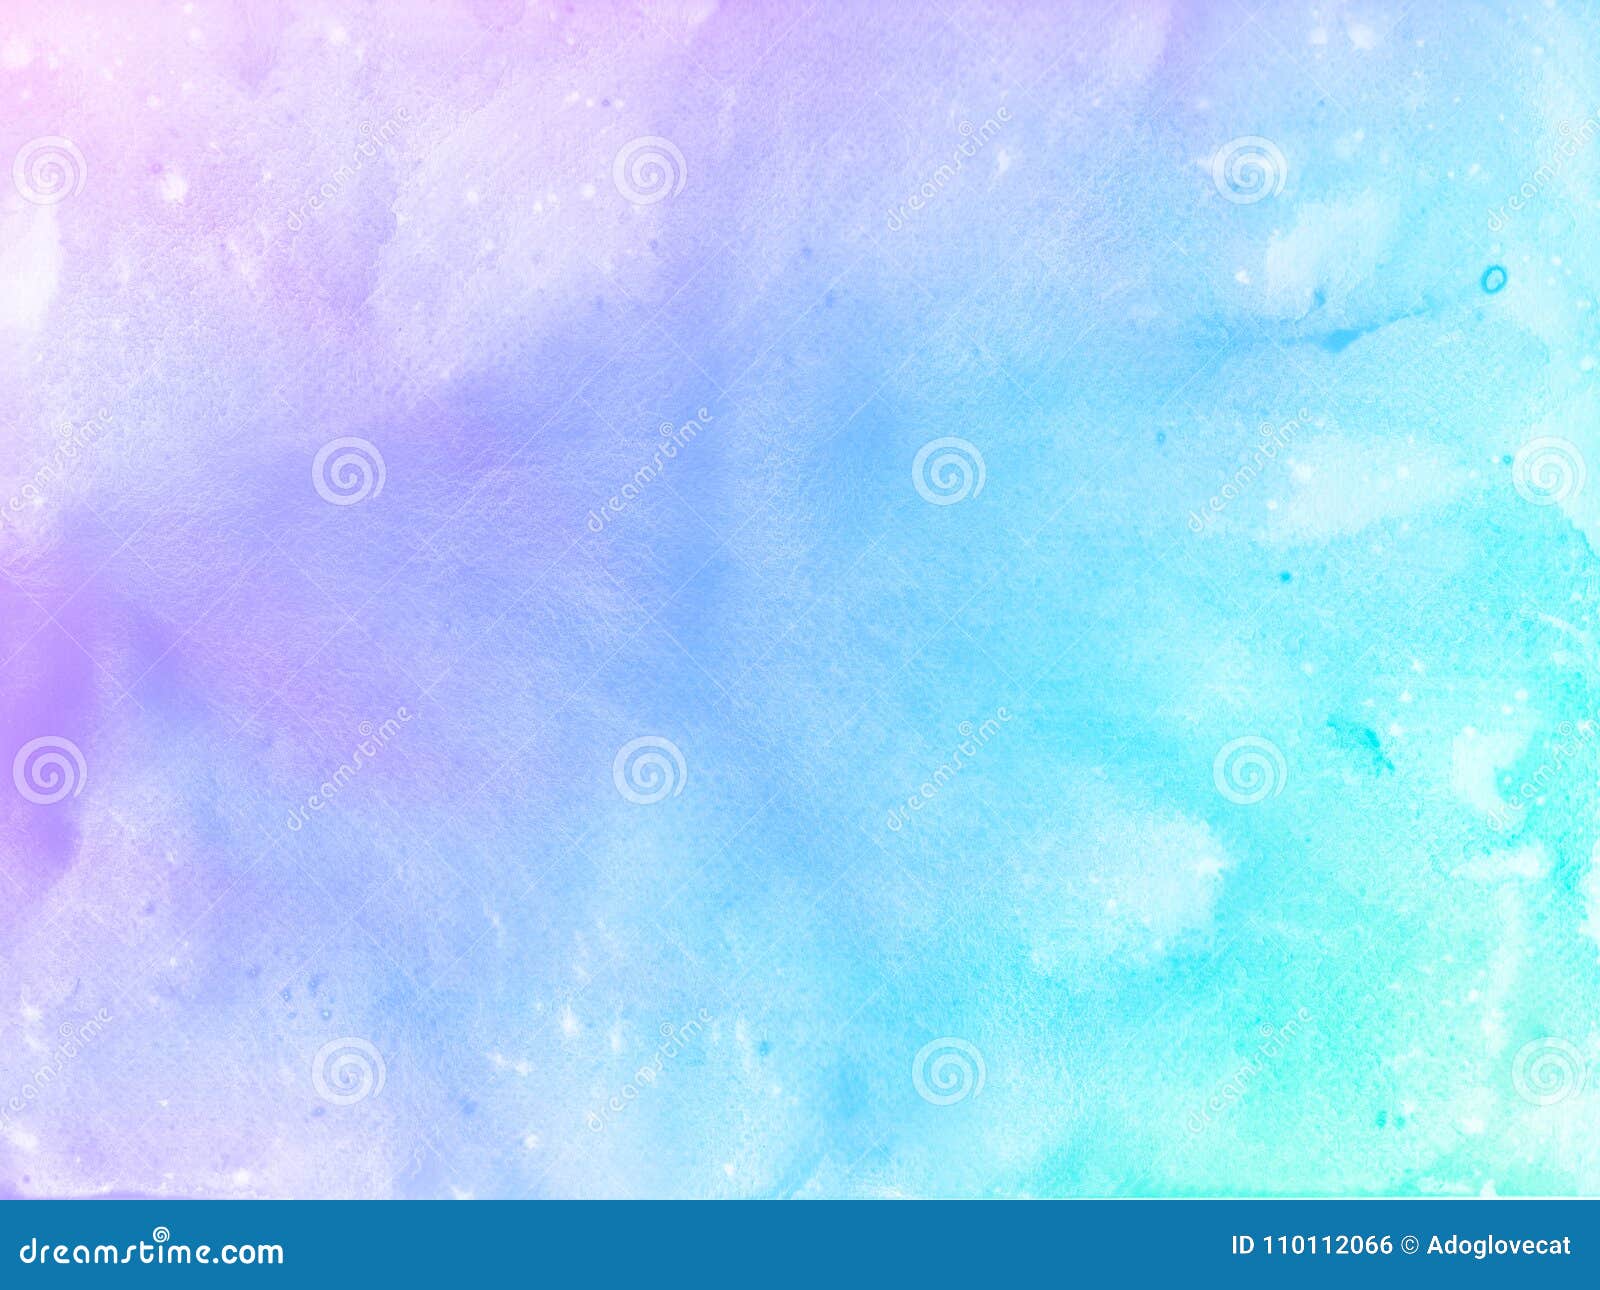 Abstract Bright Violet and Blue Watercolor Background. Stock ...